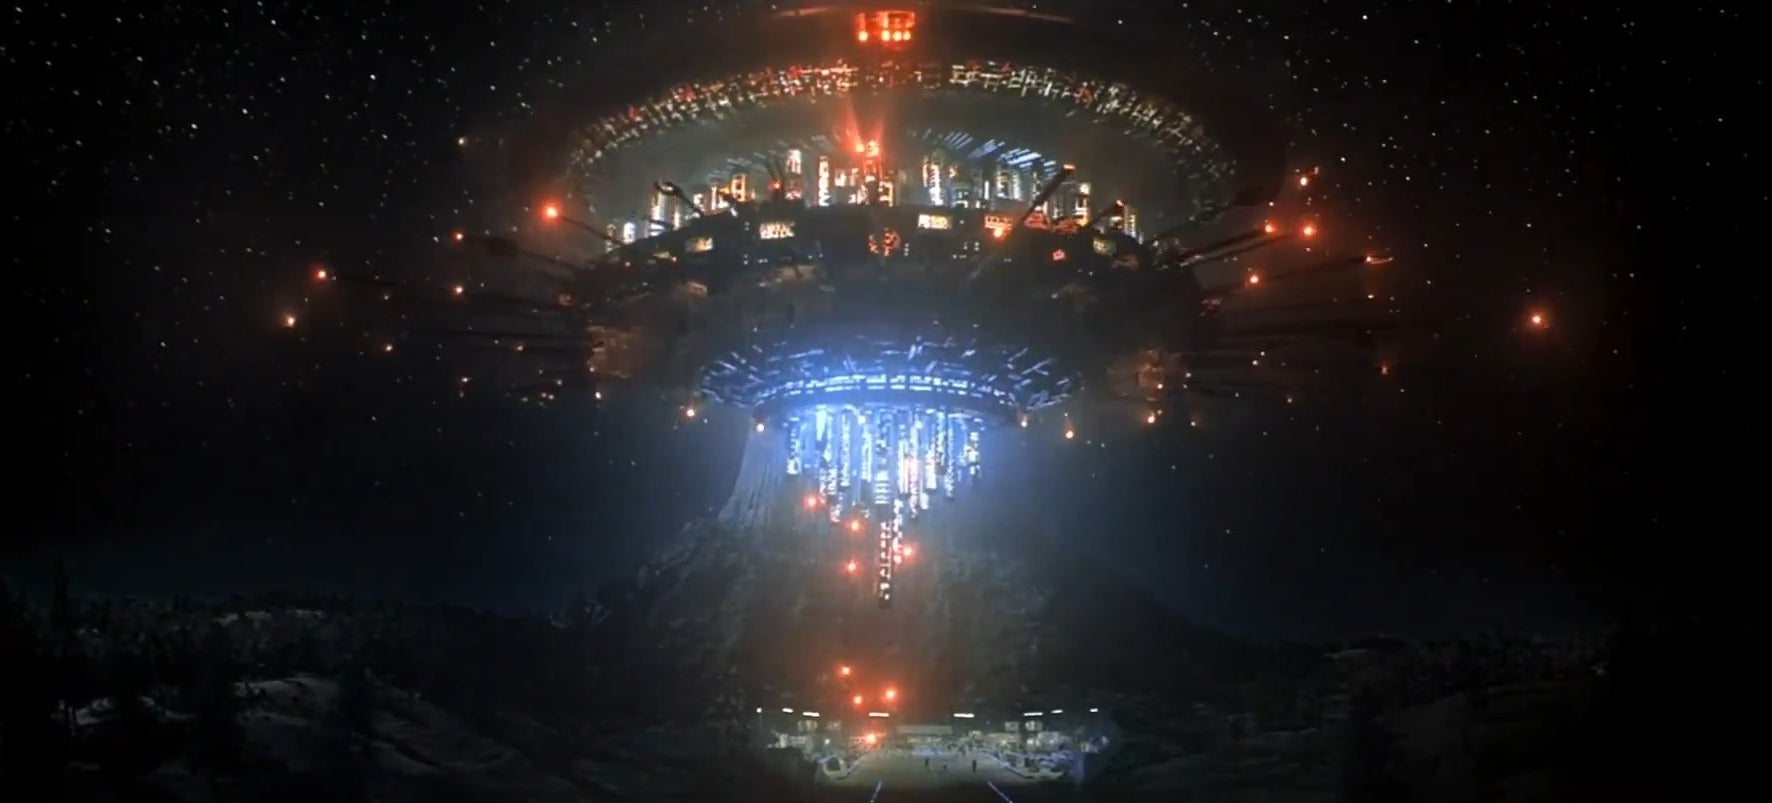 The alien mothership hovering upside down in &quot;Close Encounters of the Third Kind&quot;